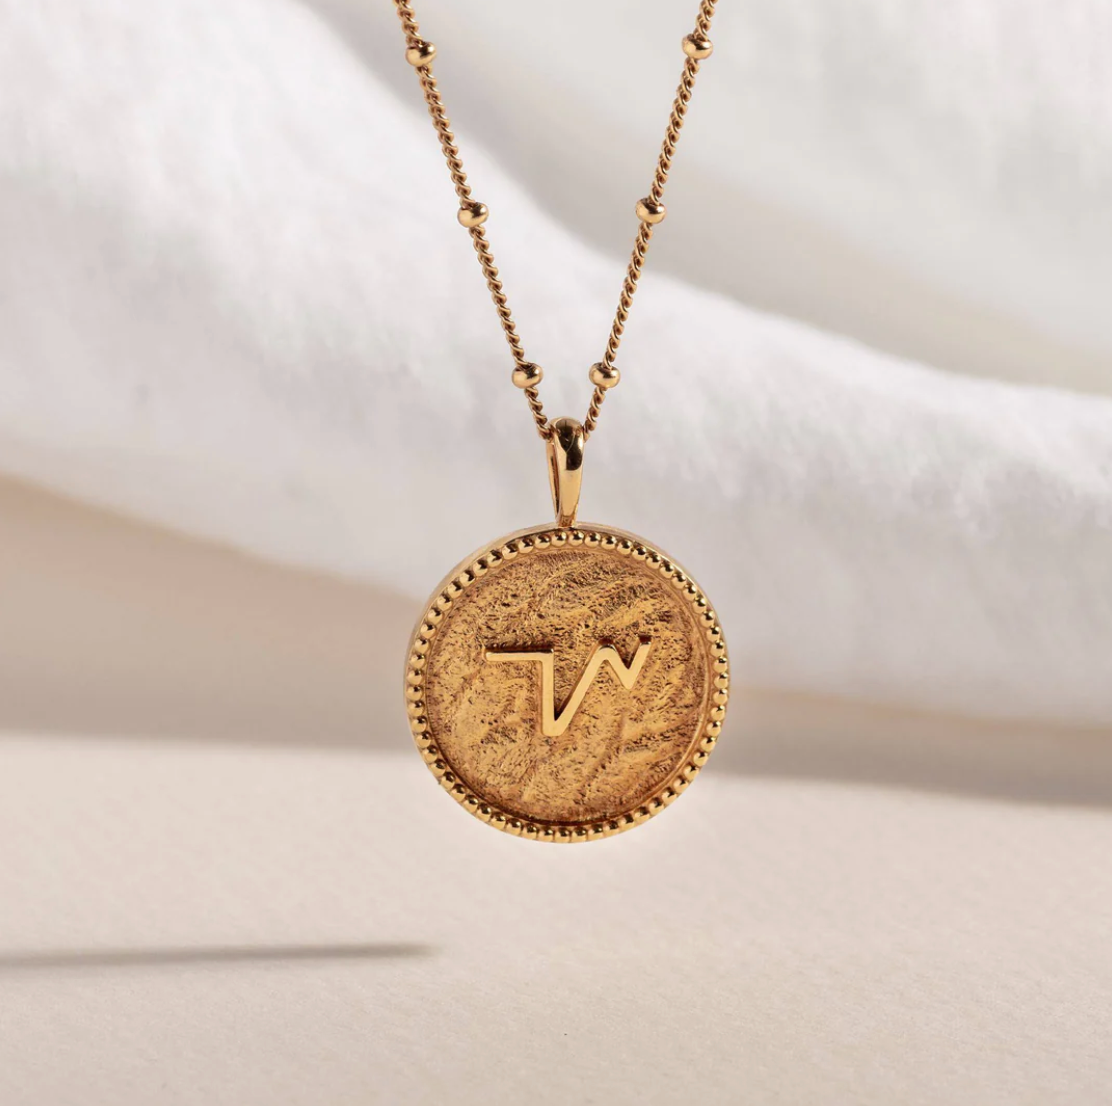 Claire Hill Designs "thrive" Shorthand Coin Necklace